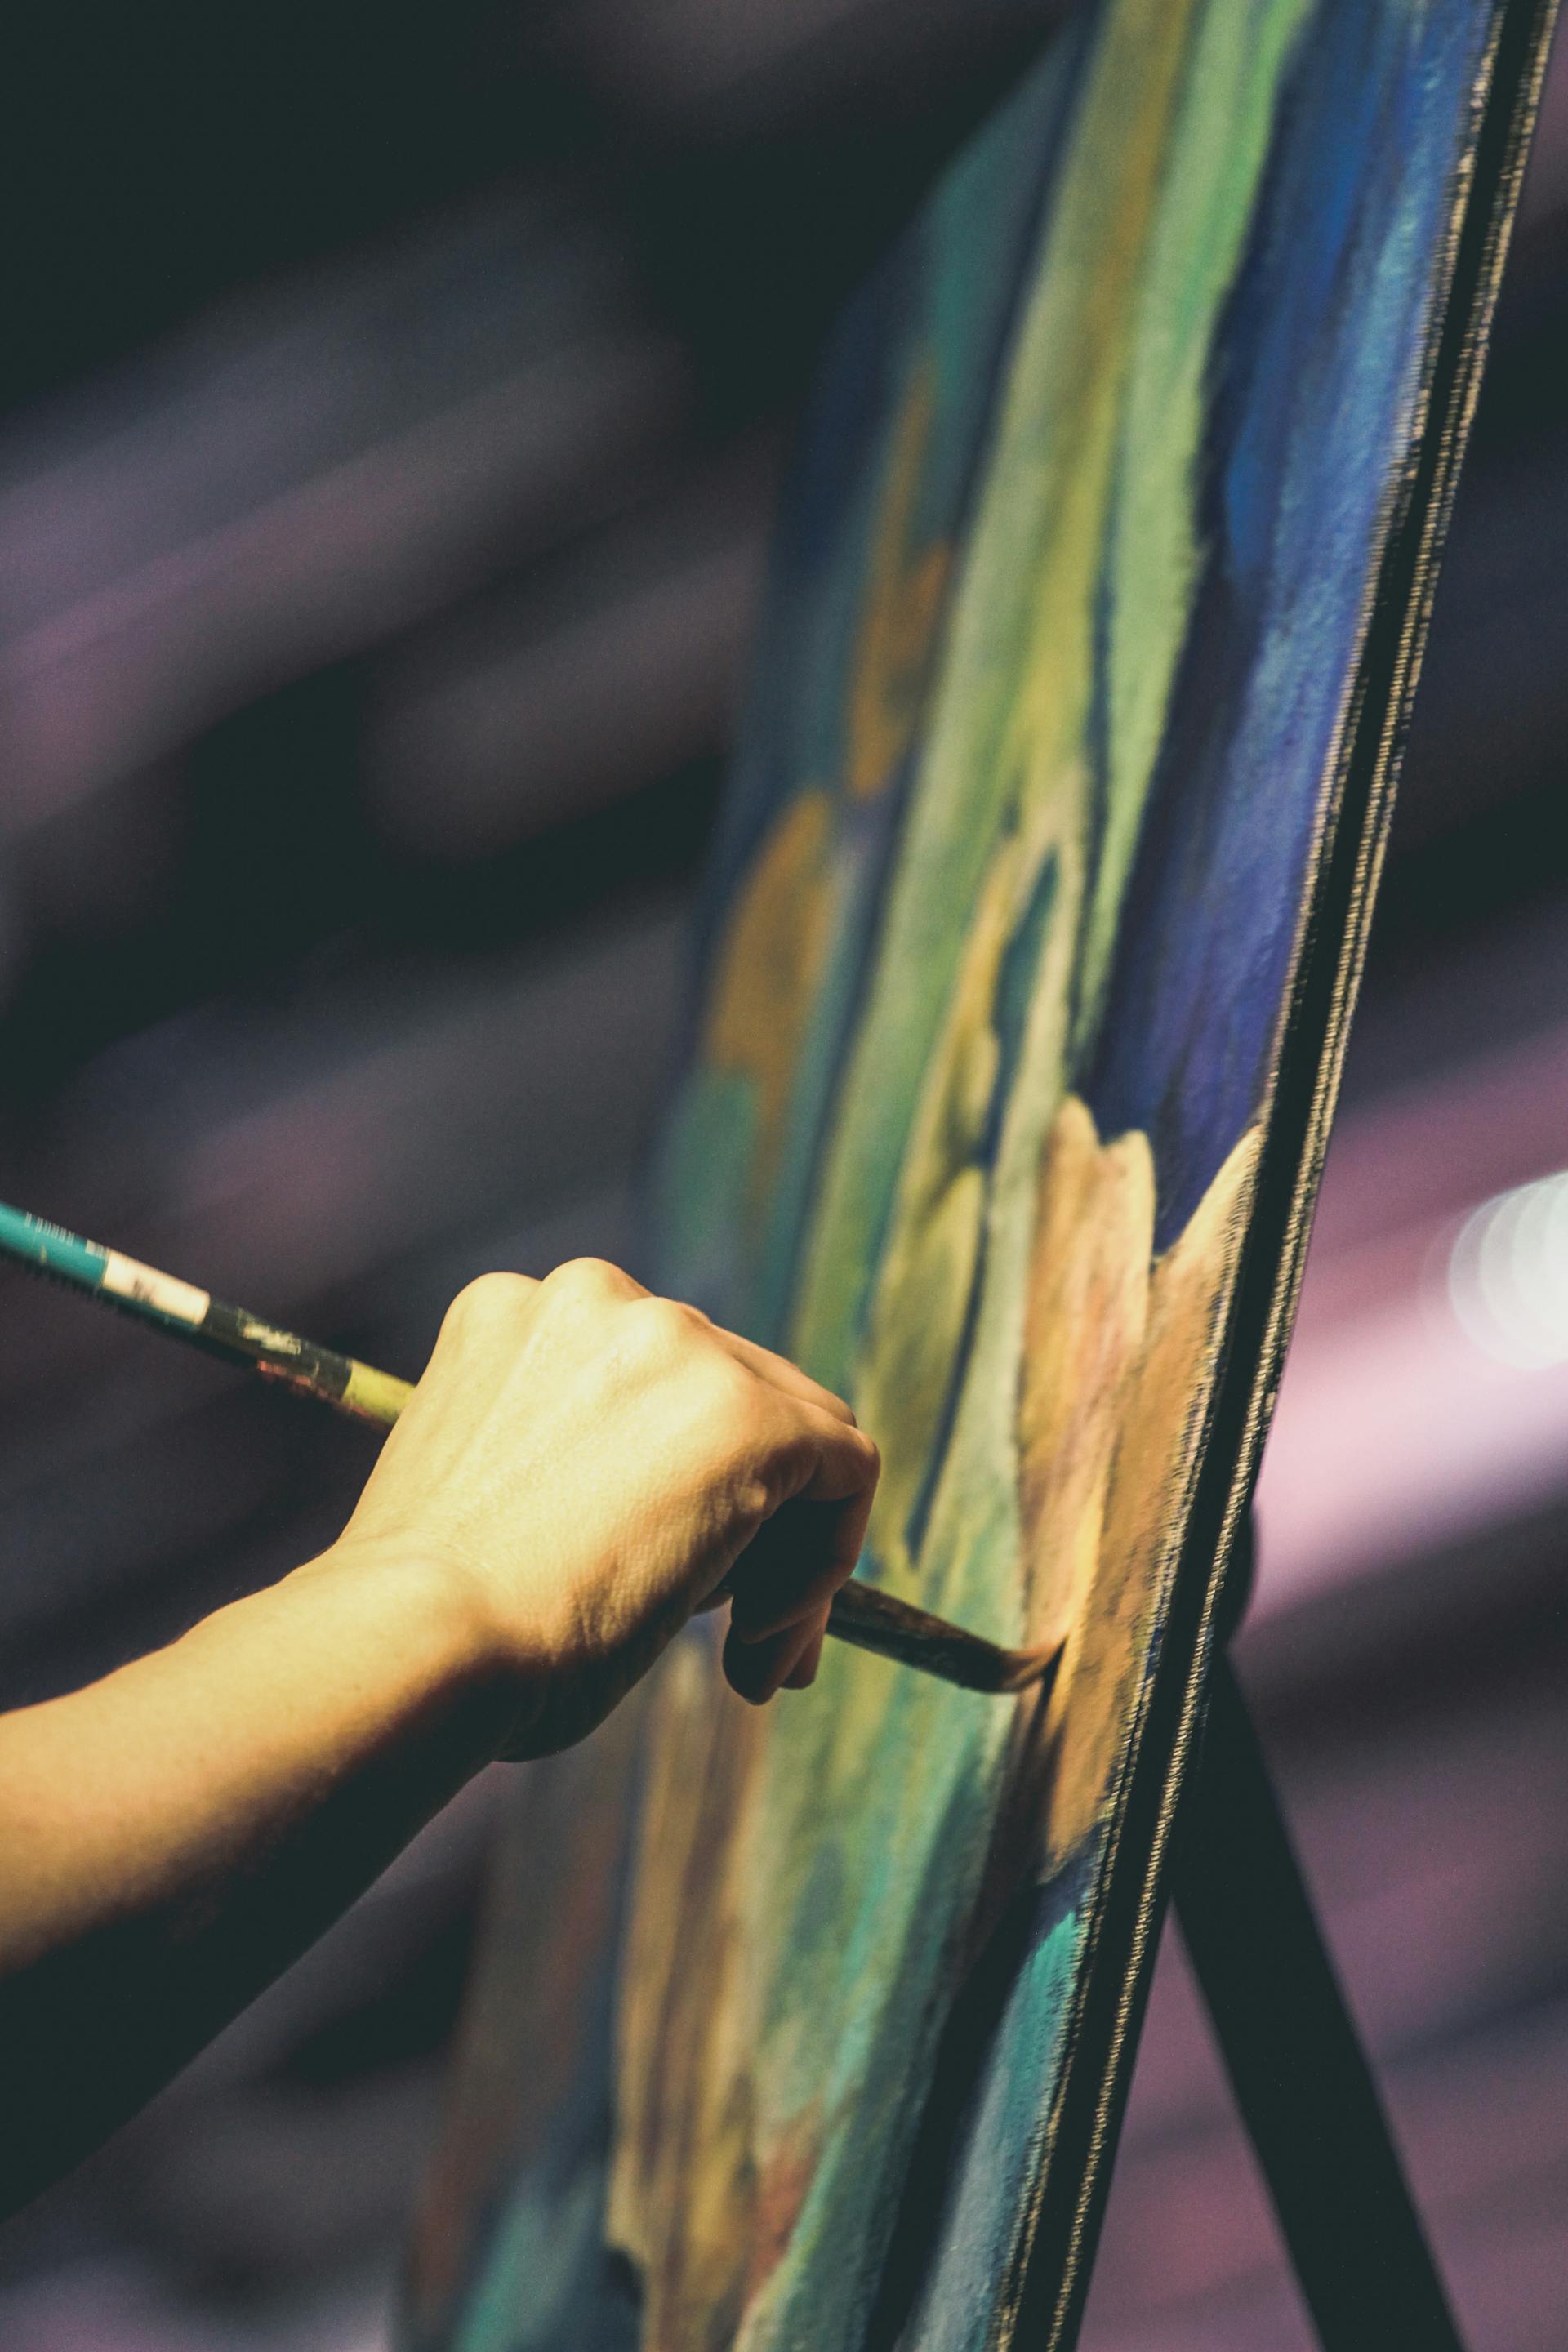 A person painting | Source: Pexels